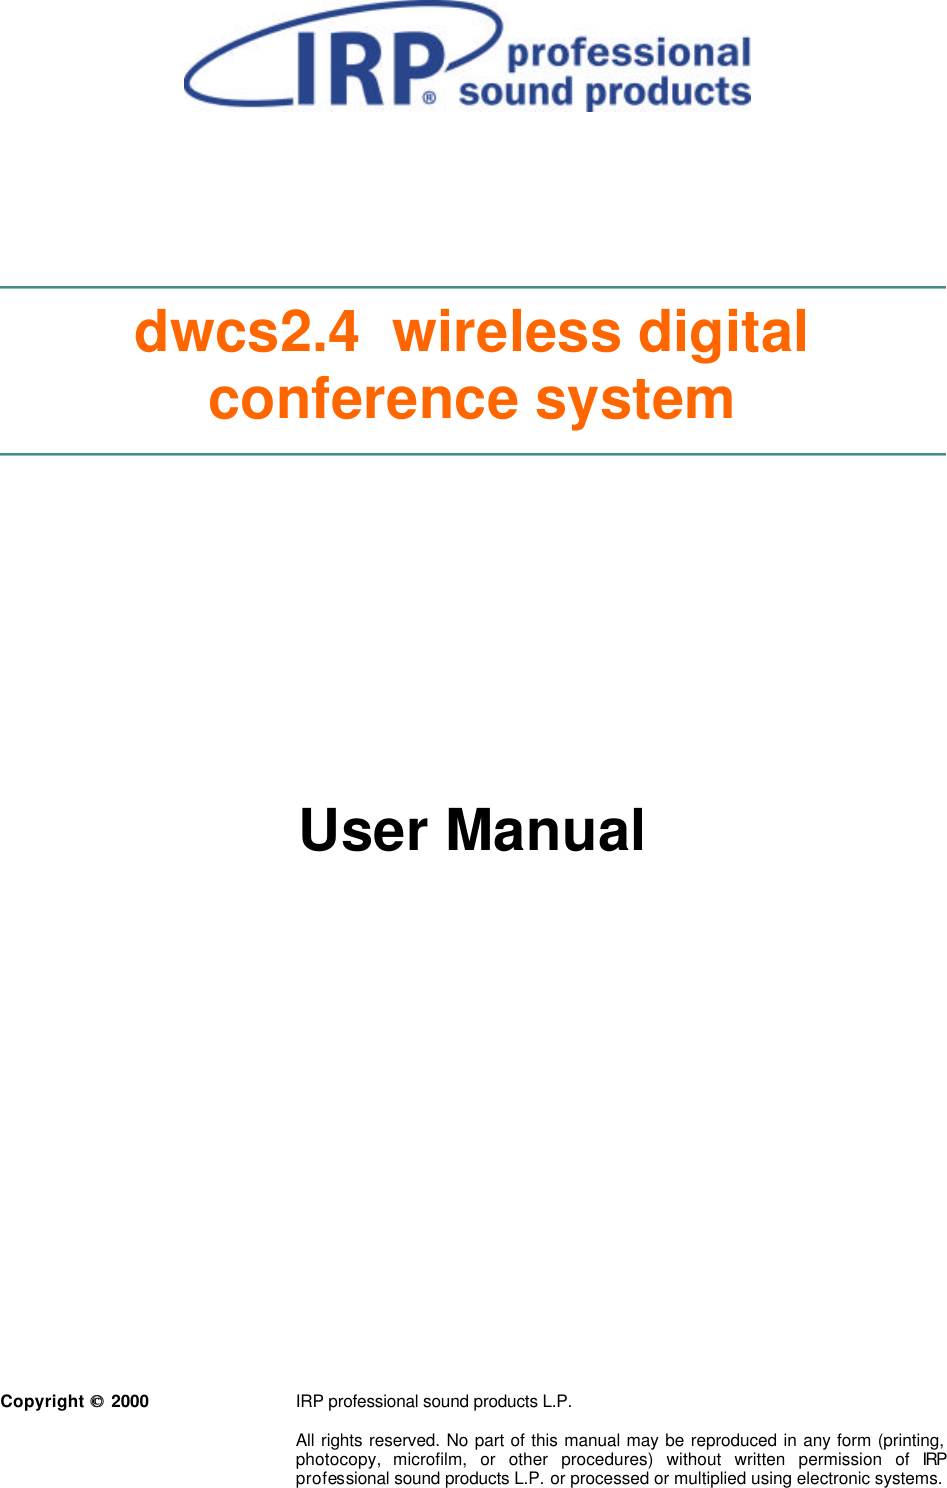          dwcs2.4  wireless digital conference system               User Manual                       Copyright   2000   IRP professional sound products L.P.  All rights reserved. No part of this manual may be reproduced in any form (printing, photocopy, microfilm, or other procedures) without written permission of IRP professional sound products L.P. or processed or multiplied using electronic systems.  